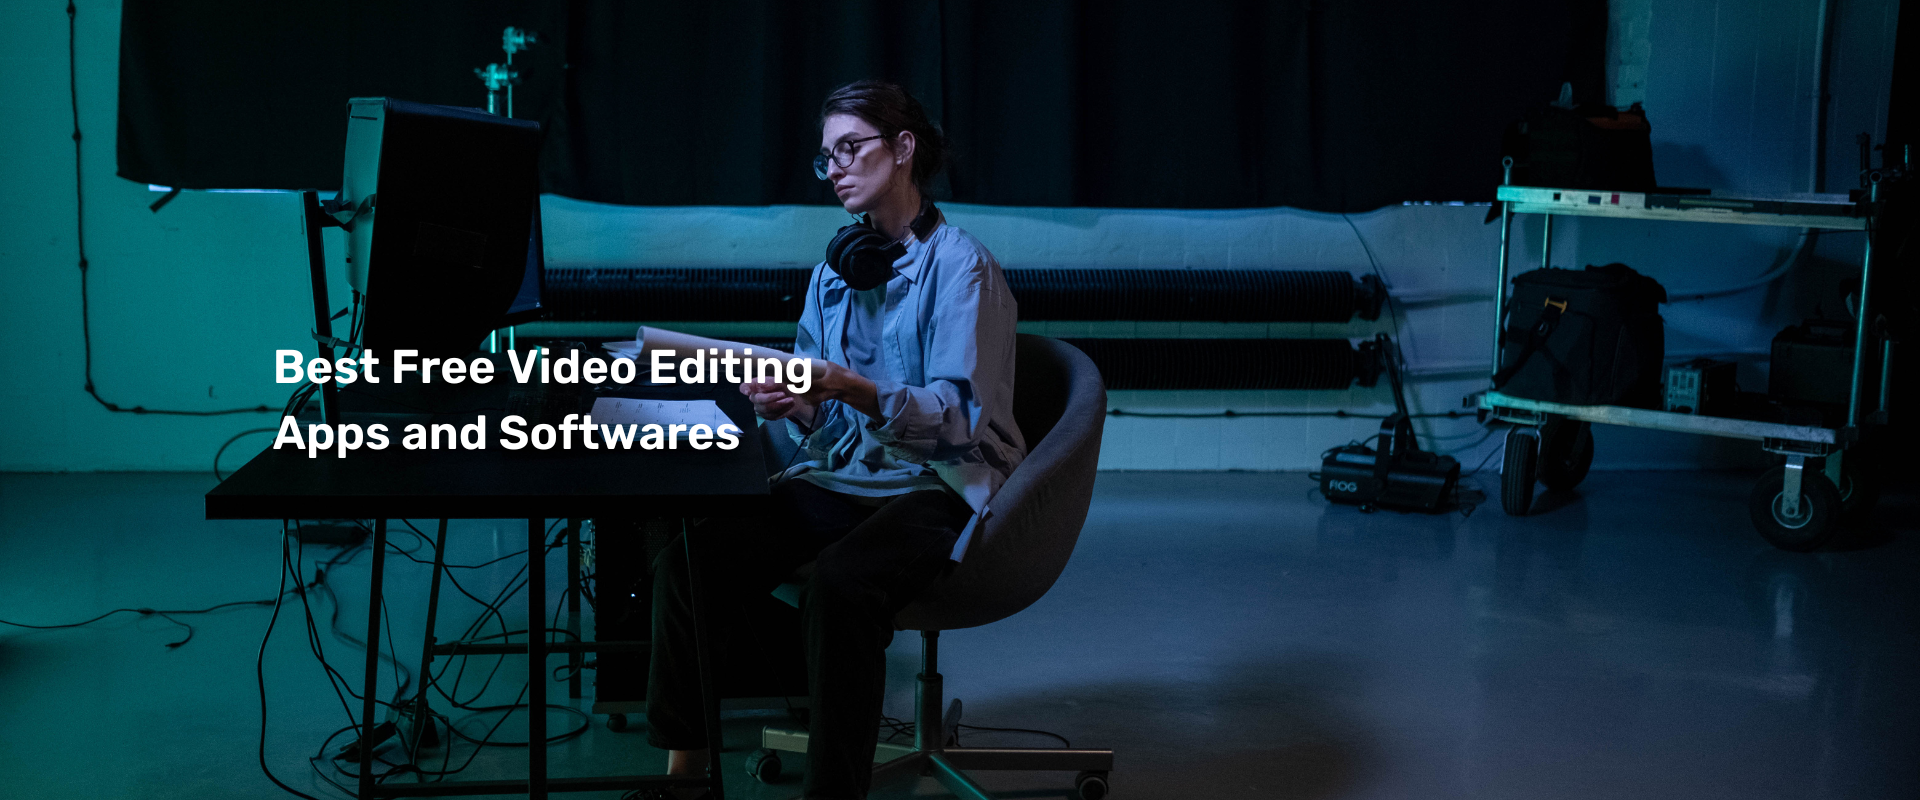 Edit Videos Like a Pro: The 15 Best Free Video Editing Apps and Softwares for 2023